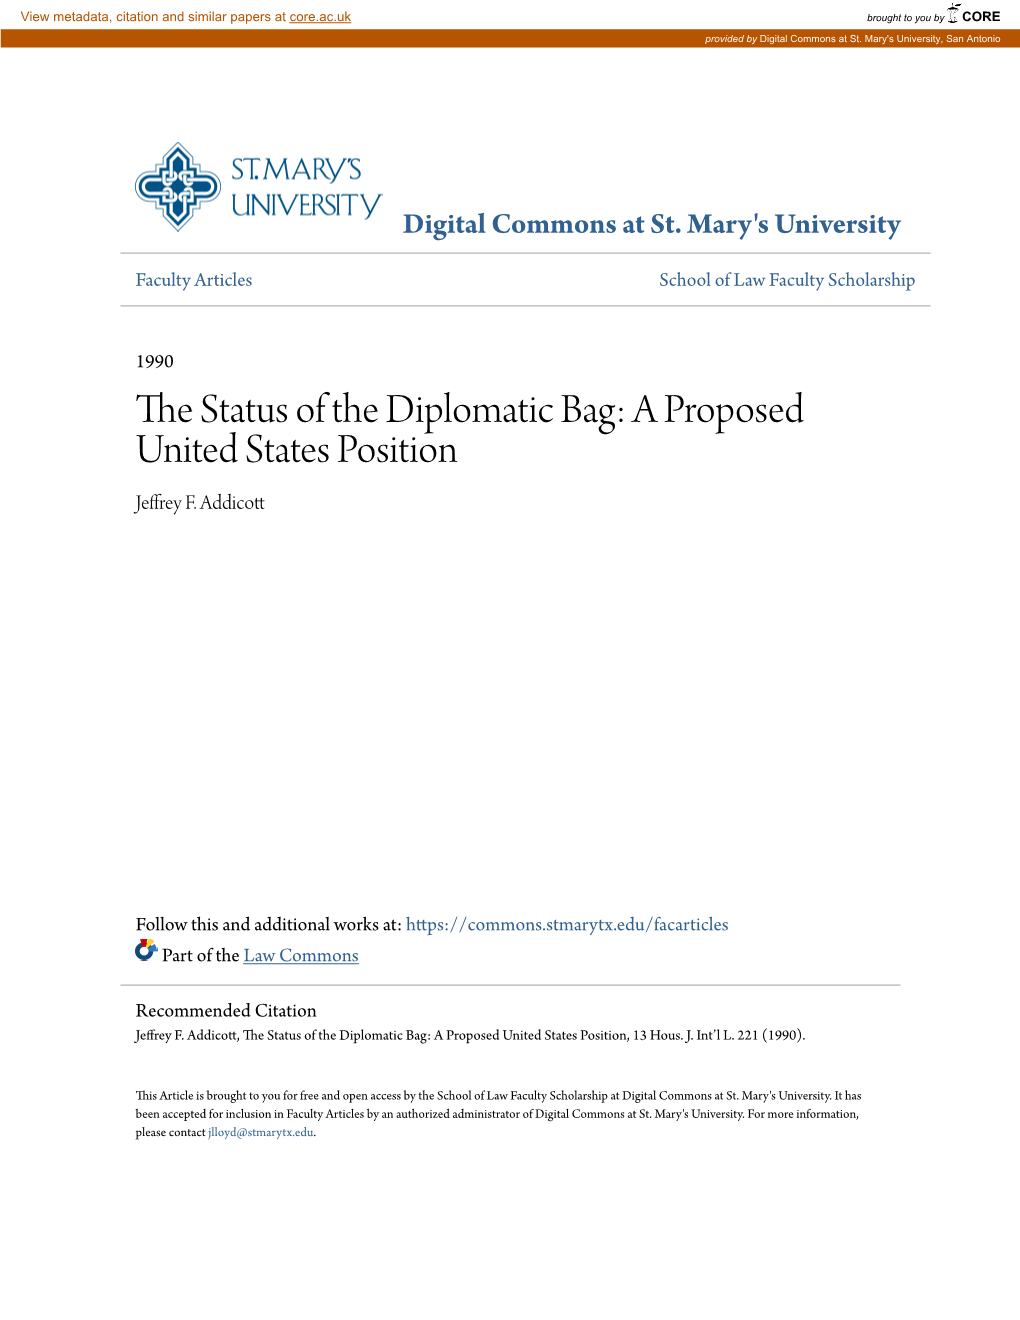 THE STATUS of the DIPLOMATIC BAG: a PROPOSED UNITED STATES POSITION Major Jeffrey F